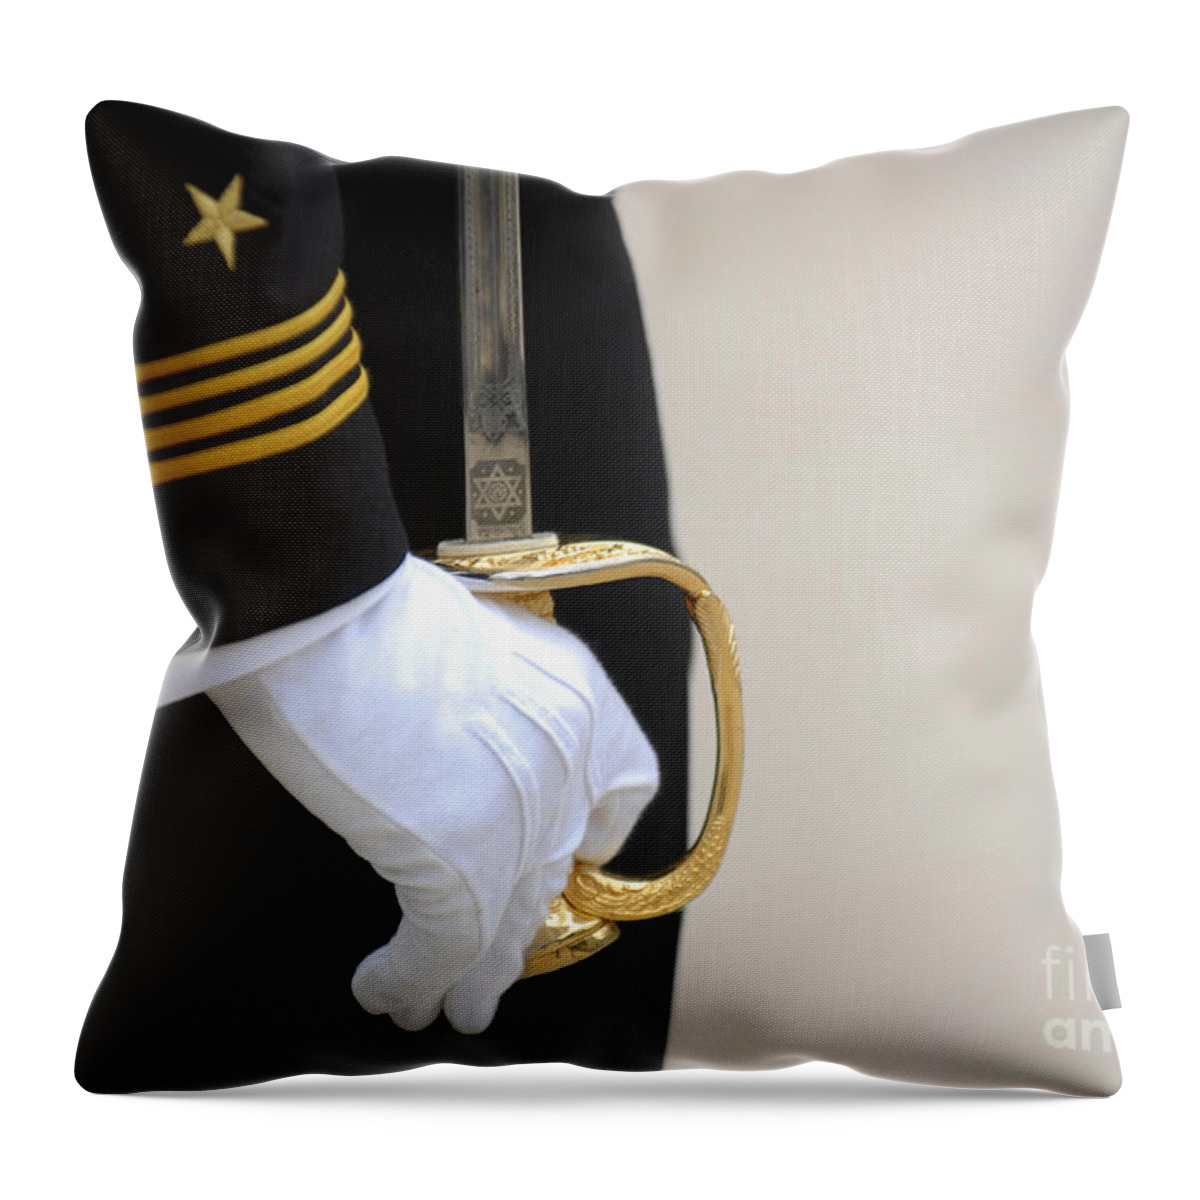 Naval Academy Throw Pillow featuring the photograph A U.s. Naval Academy Midshipman Stands by Stocktrek Images